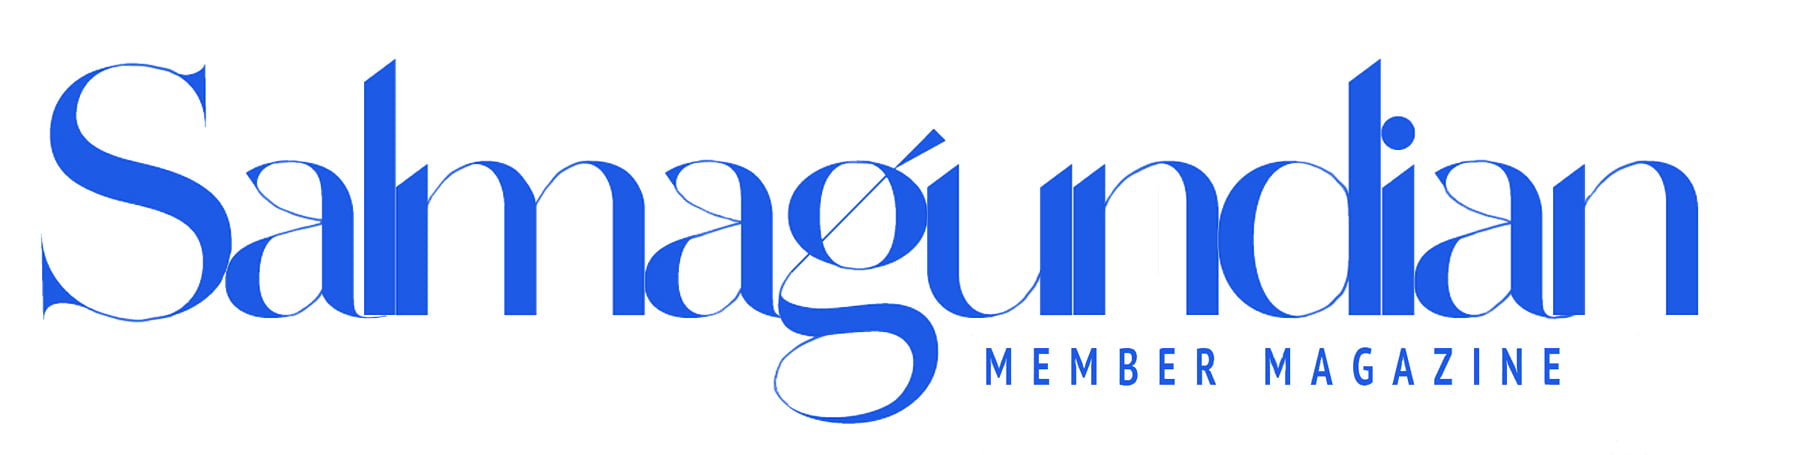 a blue and white logo for a magazine.